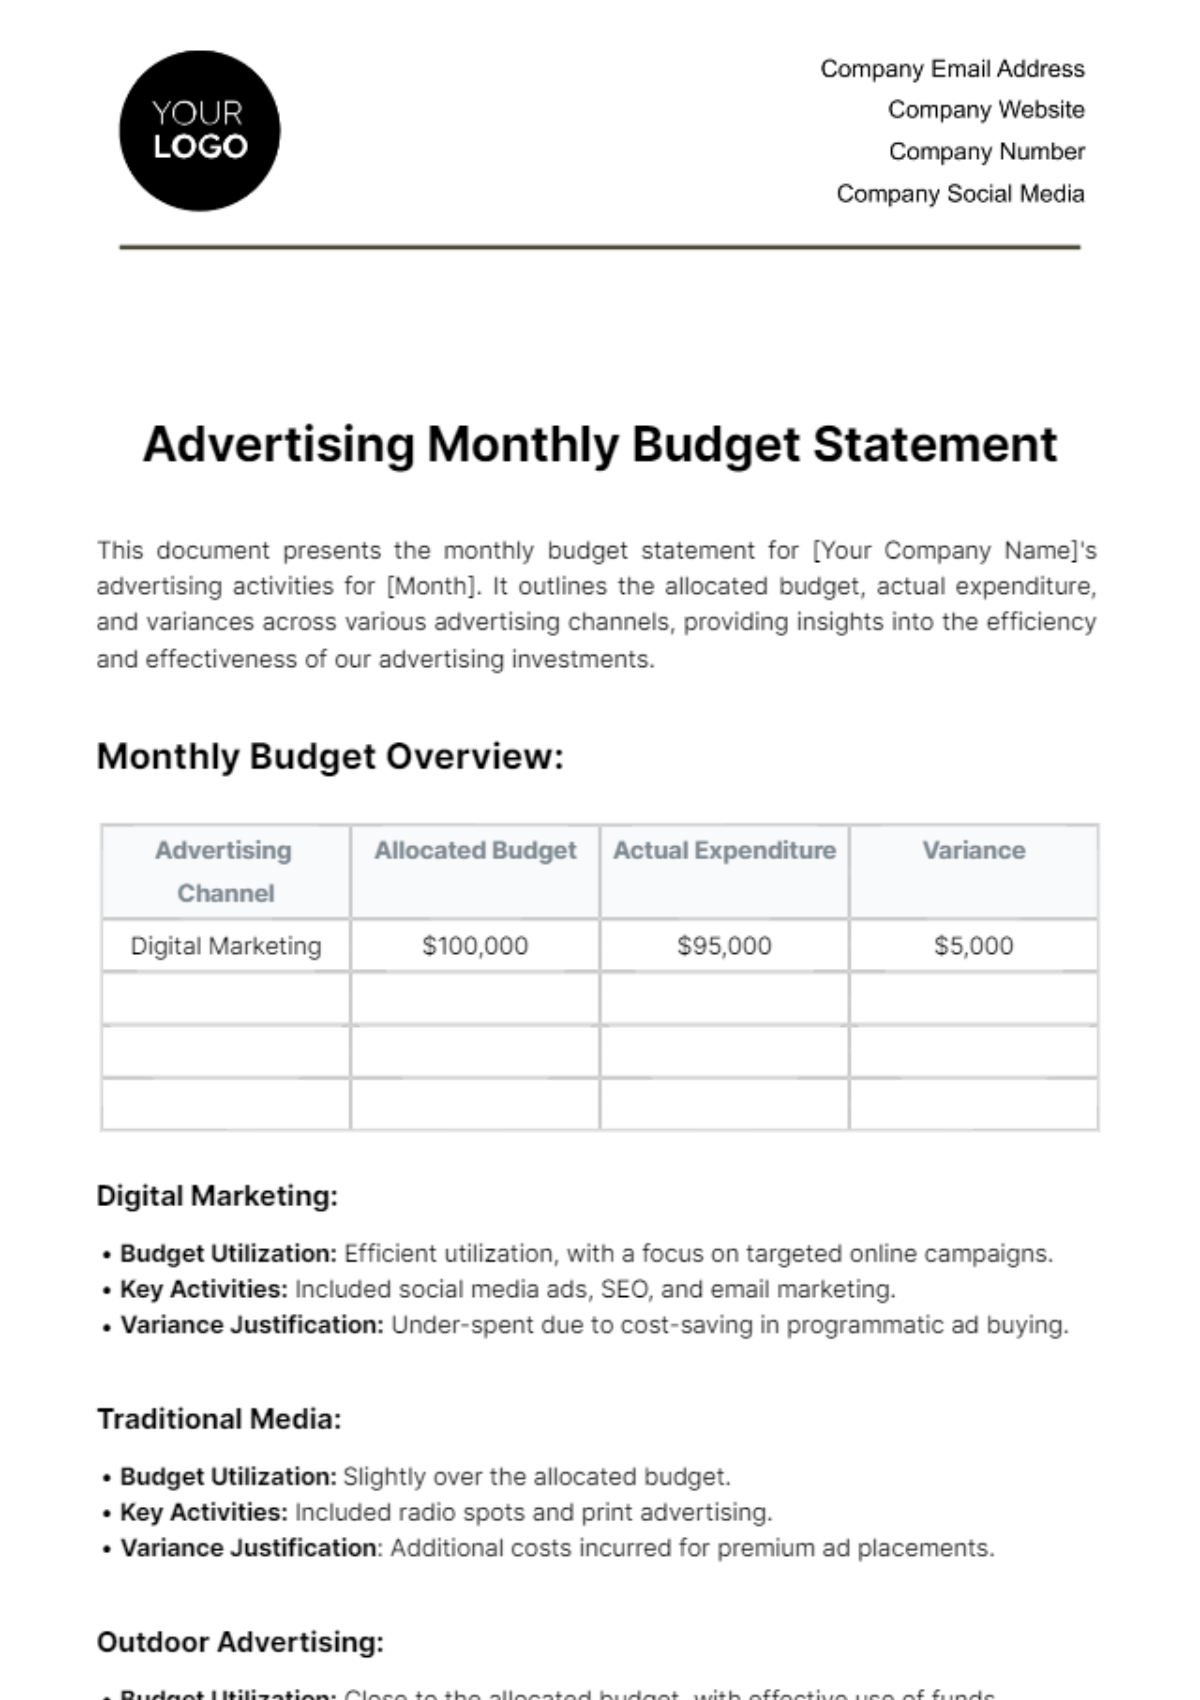 Advertising Monthly Budget Statement Template